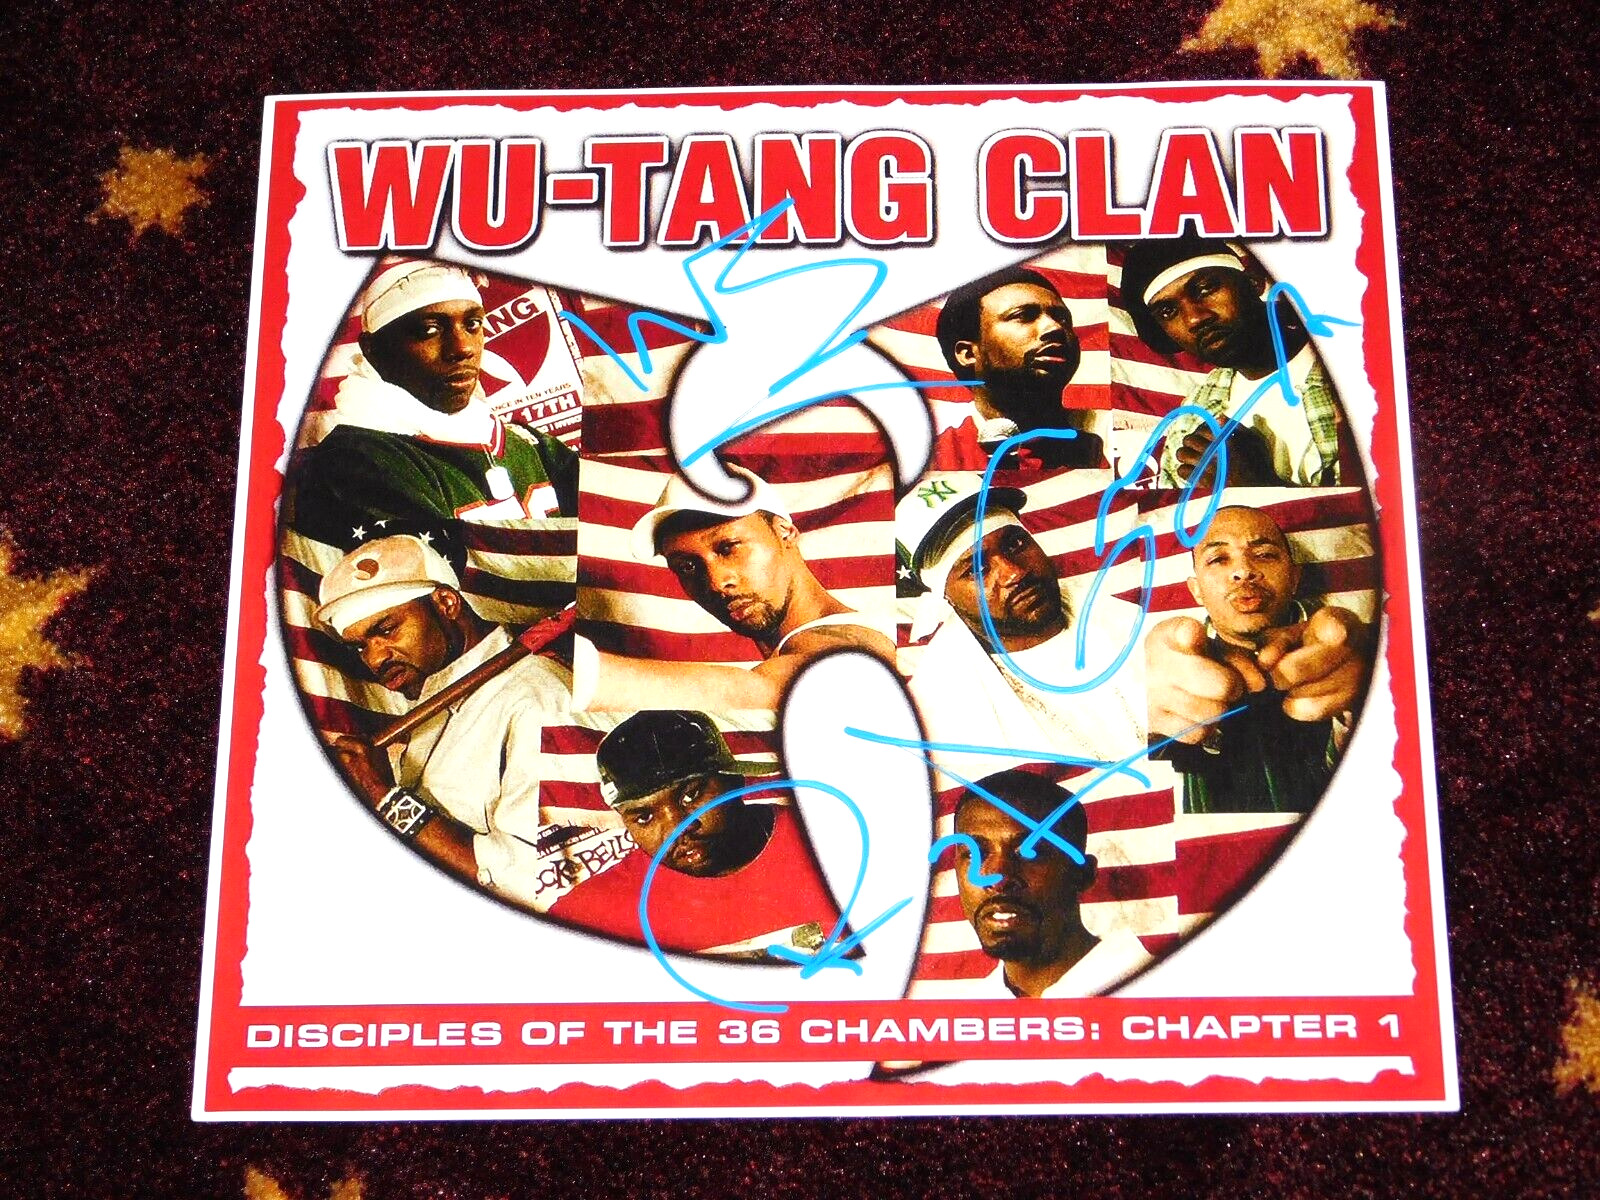 WU-TANG CLAN GZA RZA INSPECTAH SIGNED DISCIPLES OF THE 36 CHAMBERS 12X12 PHOTO